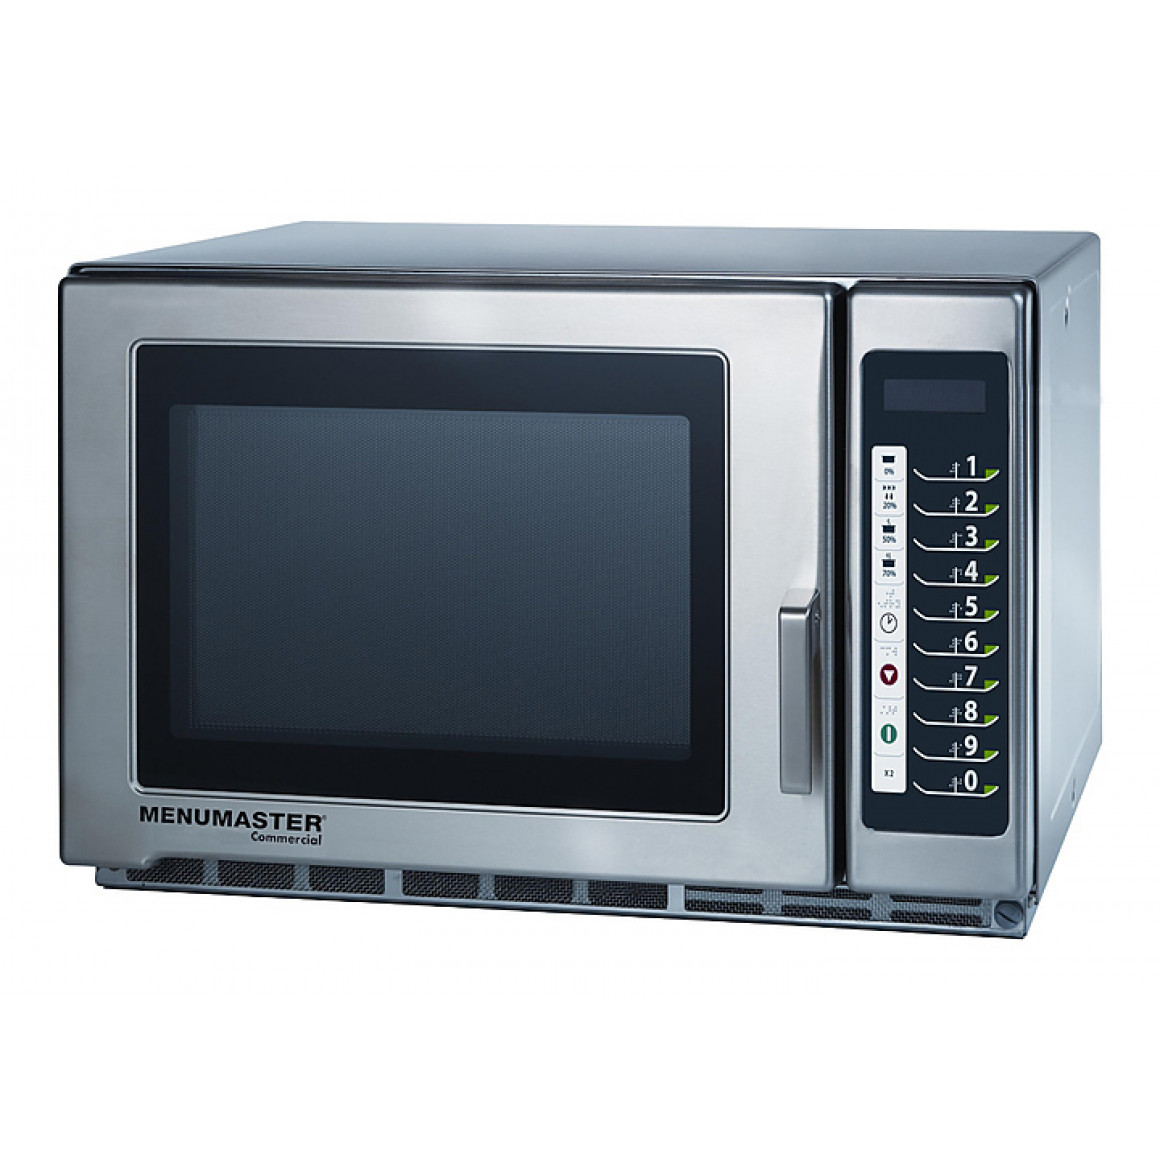 Microwave oven Commercial - CM744